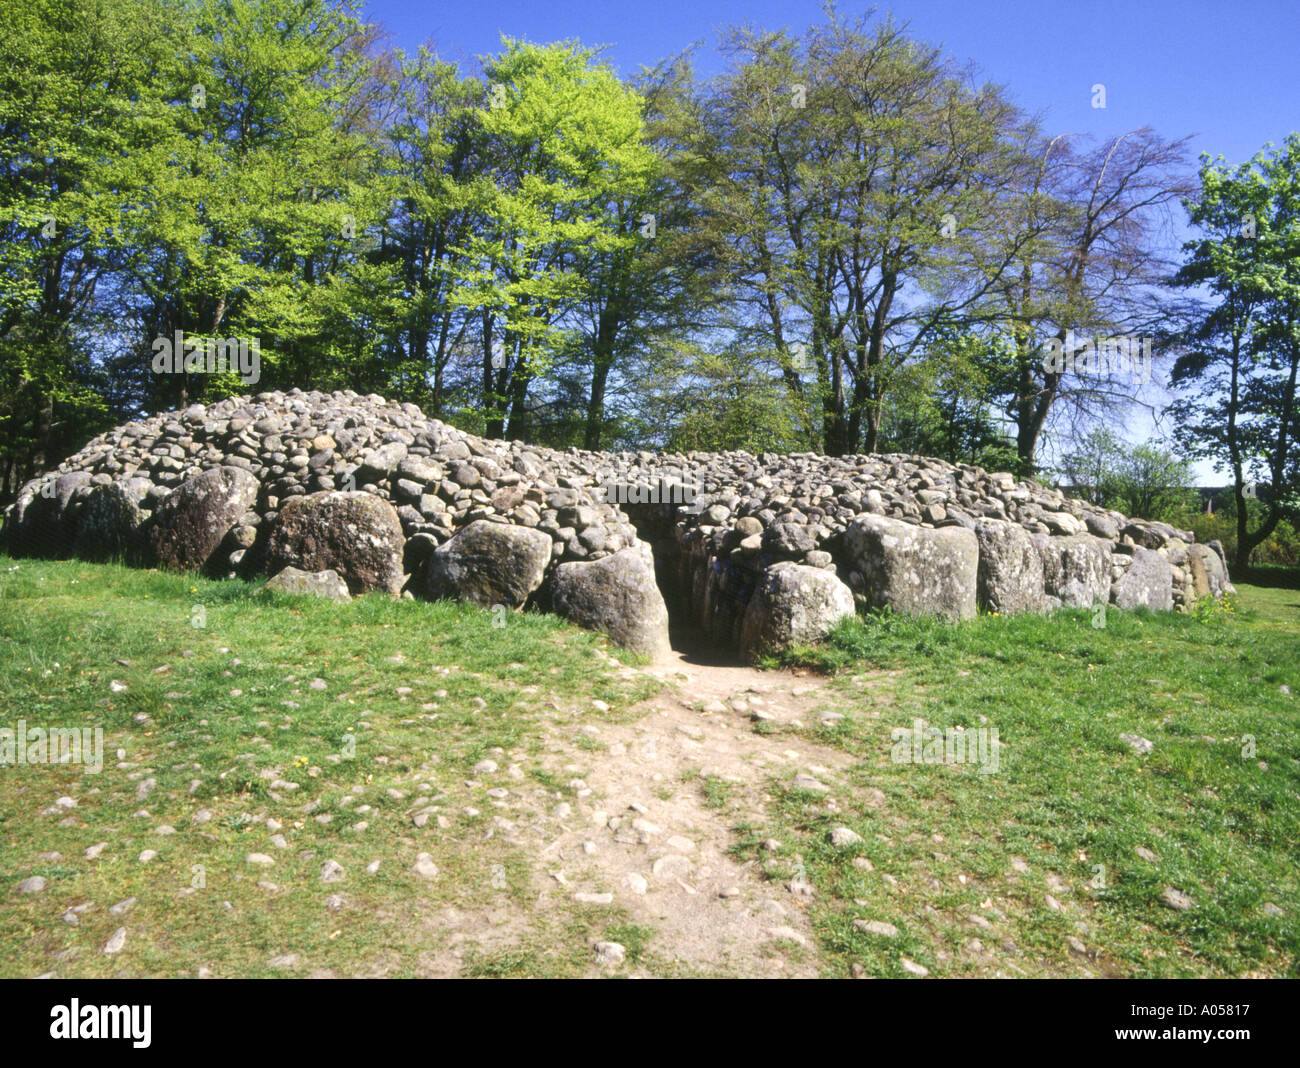 dh Balnuaran of Clava CLAVA INVERNESSSHIRE Bronze age burial mound chambered cairn cairns uk neolithic scotland chamber cemetery Stock Photo